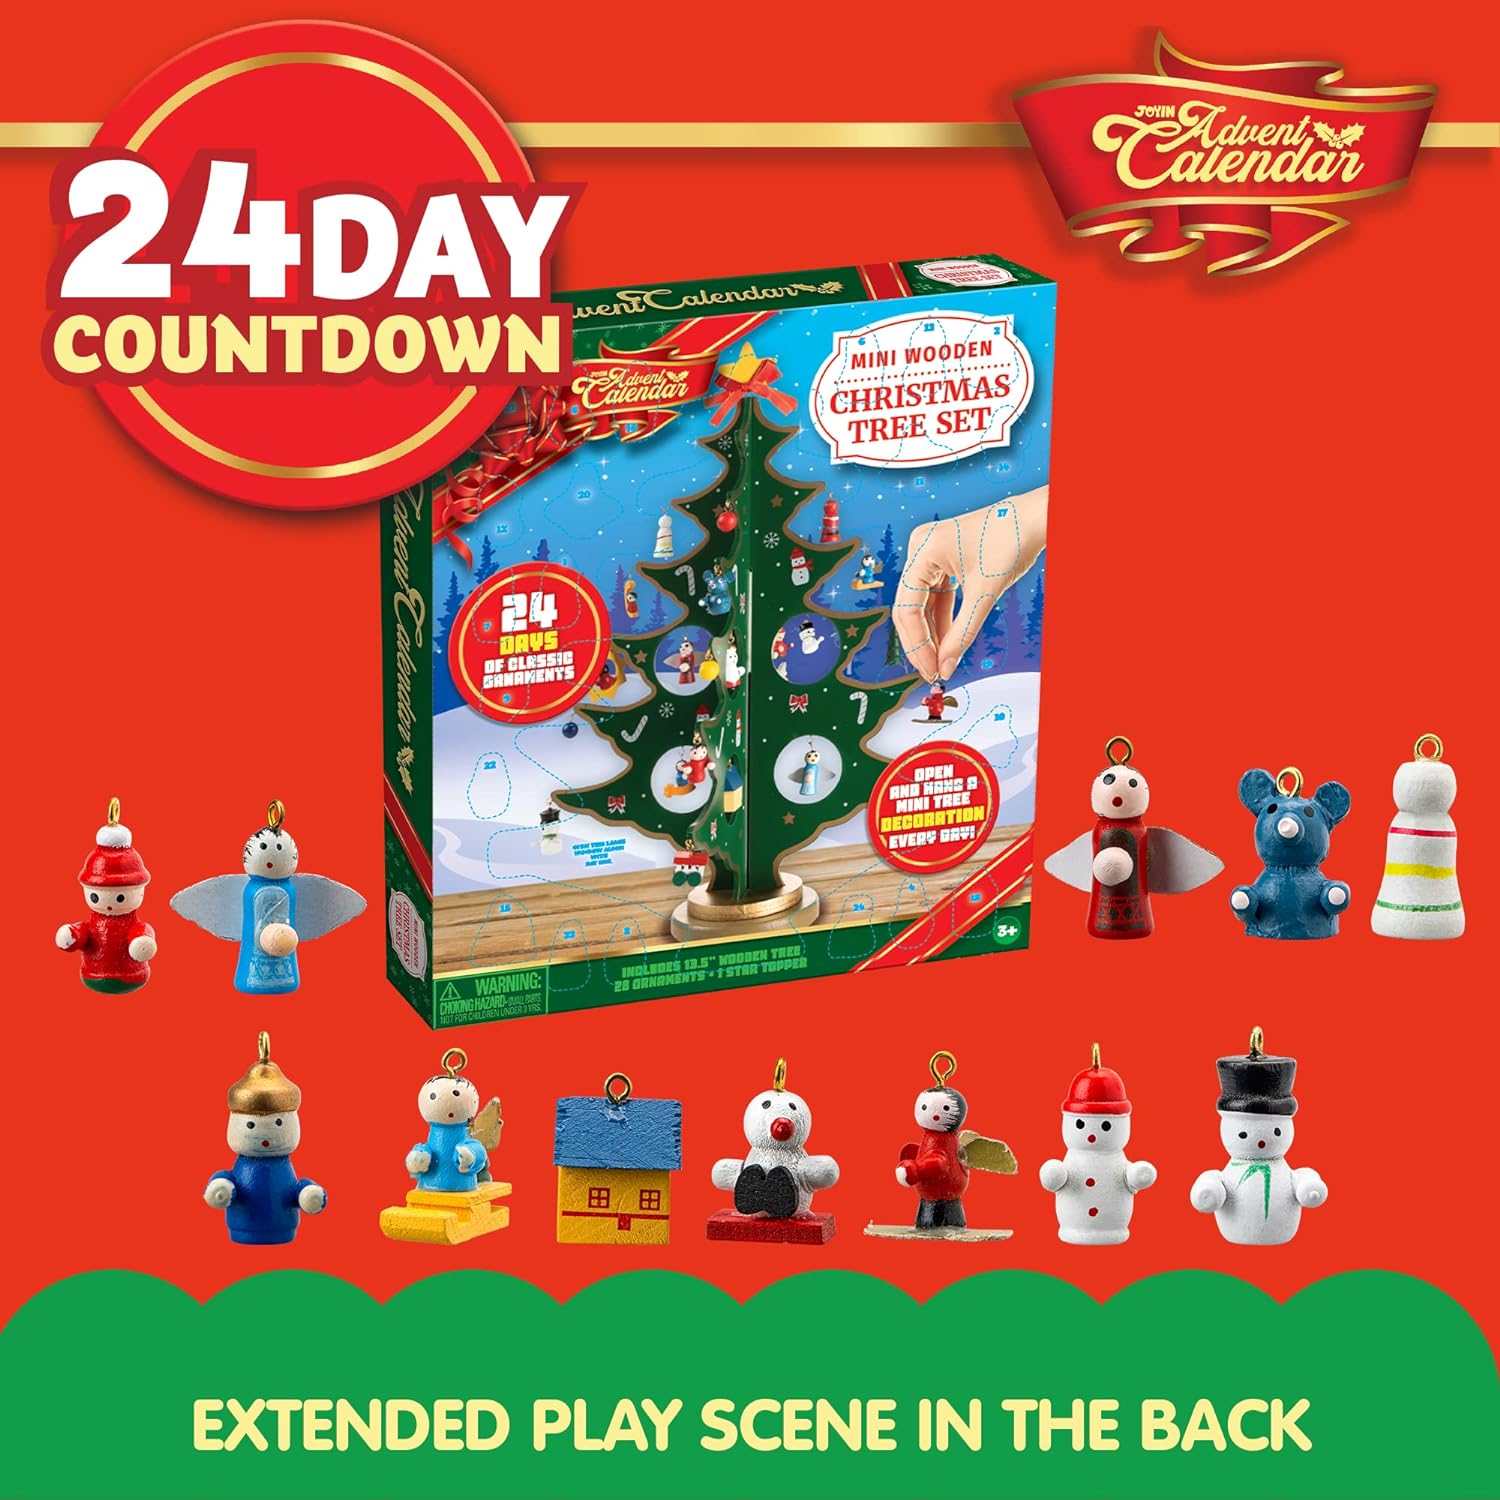 Christmas 24 Days Countdown Advent Calendar with a Tabletop Wooden Christmas Tree and 28 Ornaments Snowman Santa Decorations for Boys, Girls and Kids Party Favors Gift